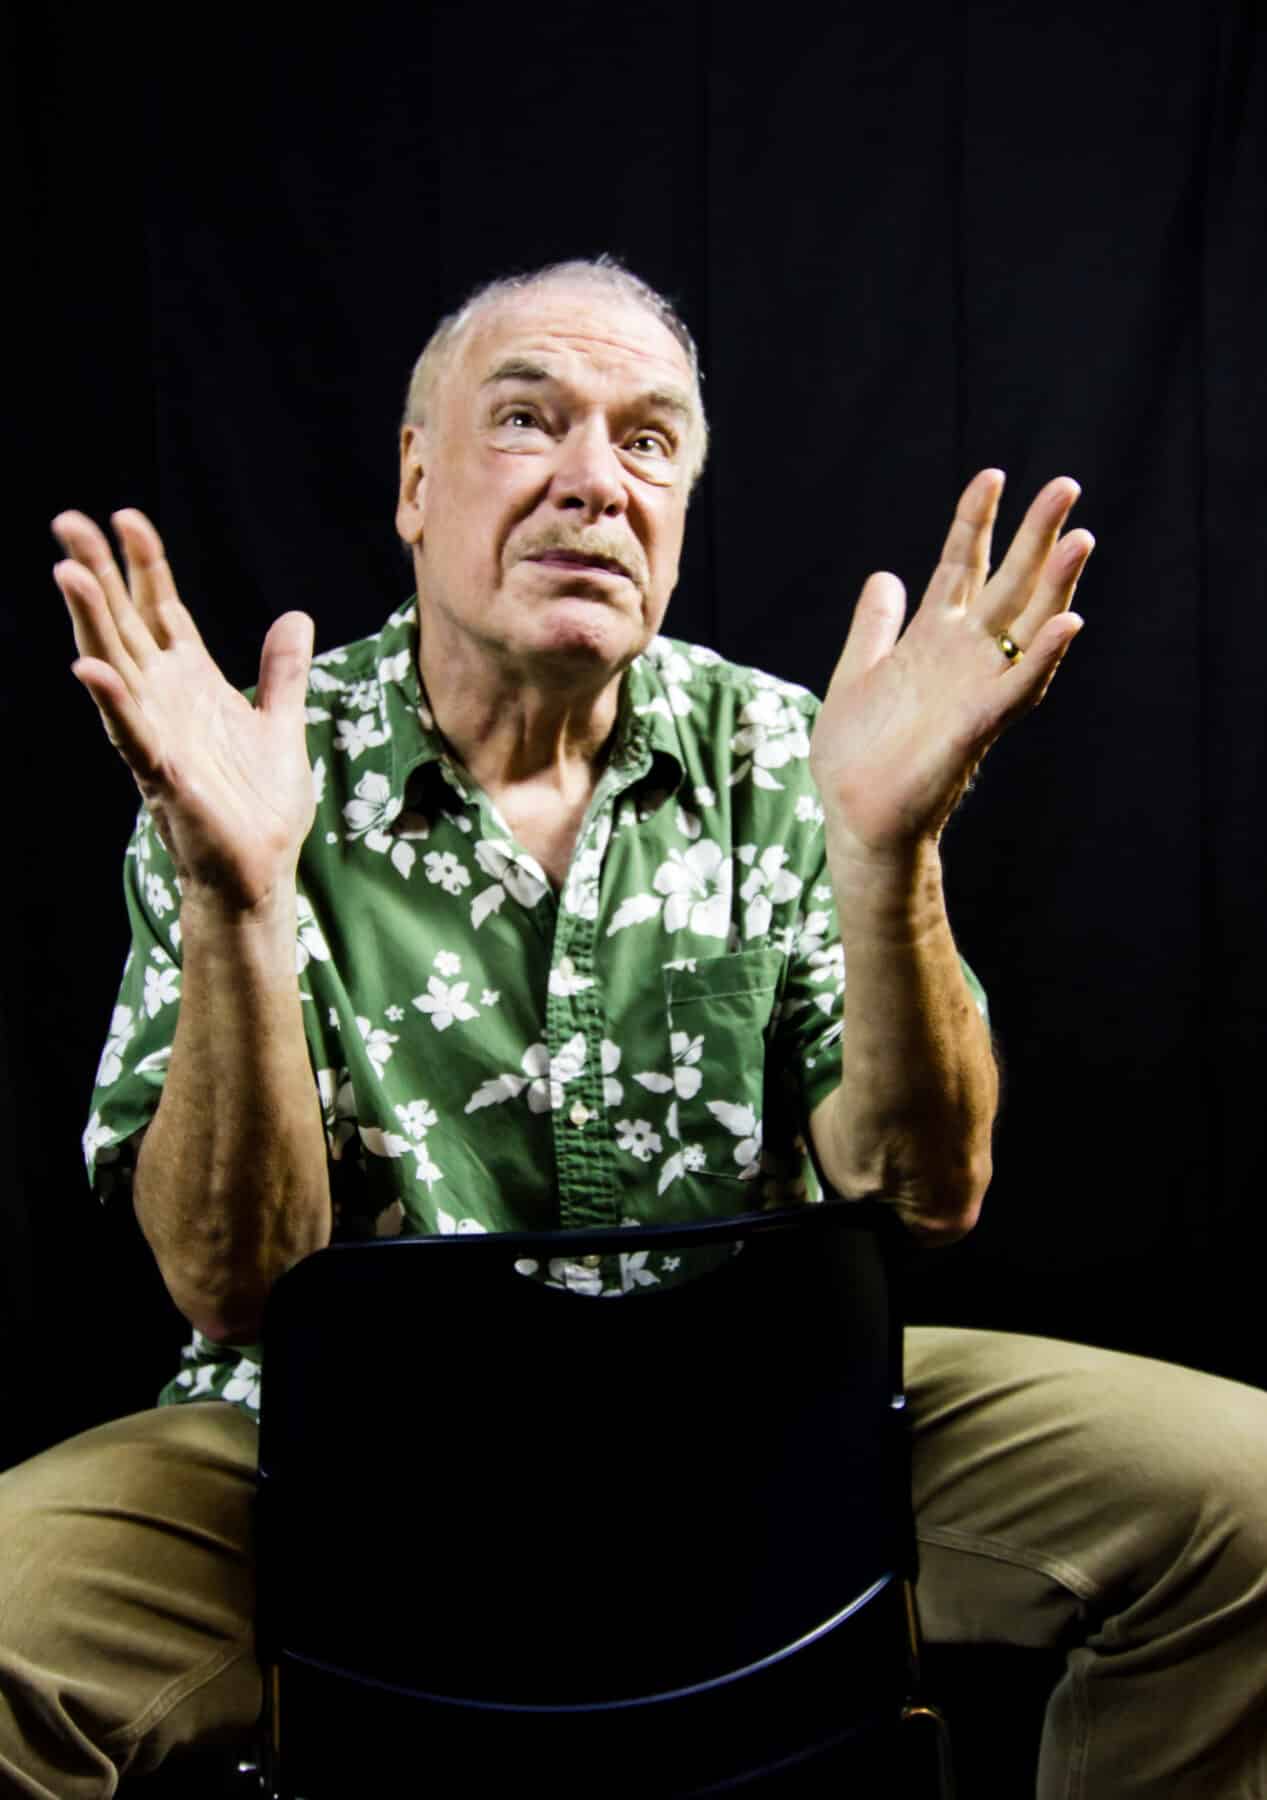 Jon Spelman is sitting on a chair, gesturing upwards with his hands, as he looks up and into the distance.